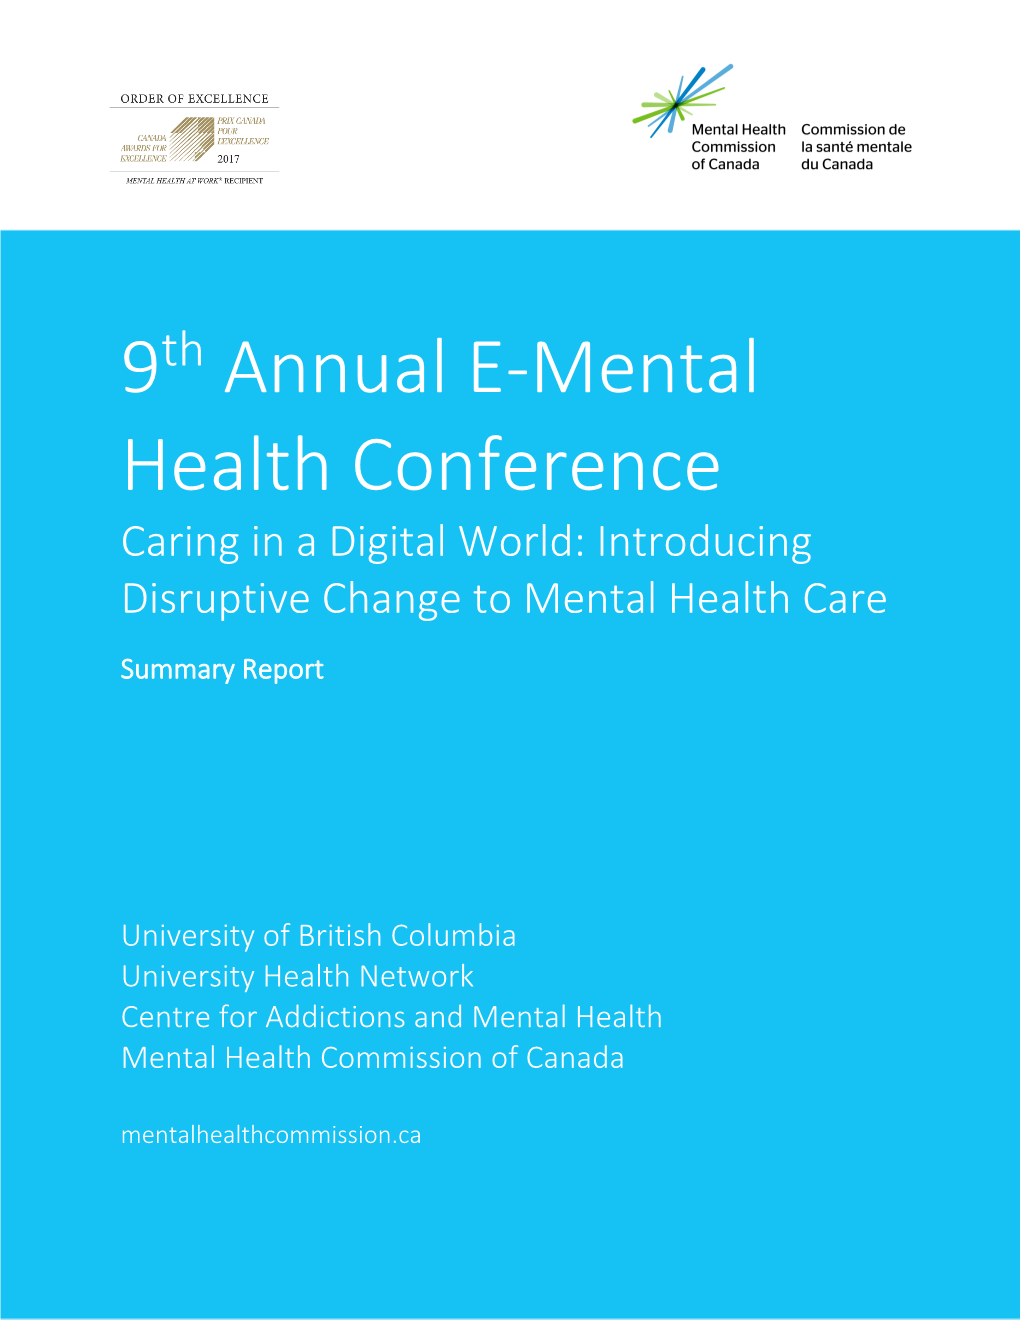 9Th Annual E-Mental Health Conference Caring in a Digital World: Introducing Disruptive Change to Mental Health Care